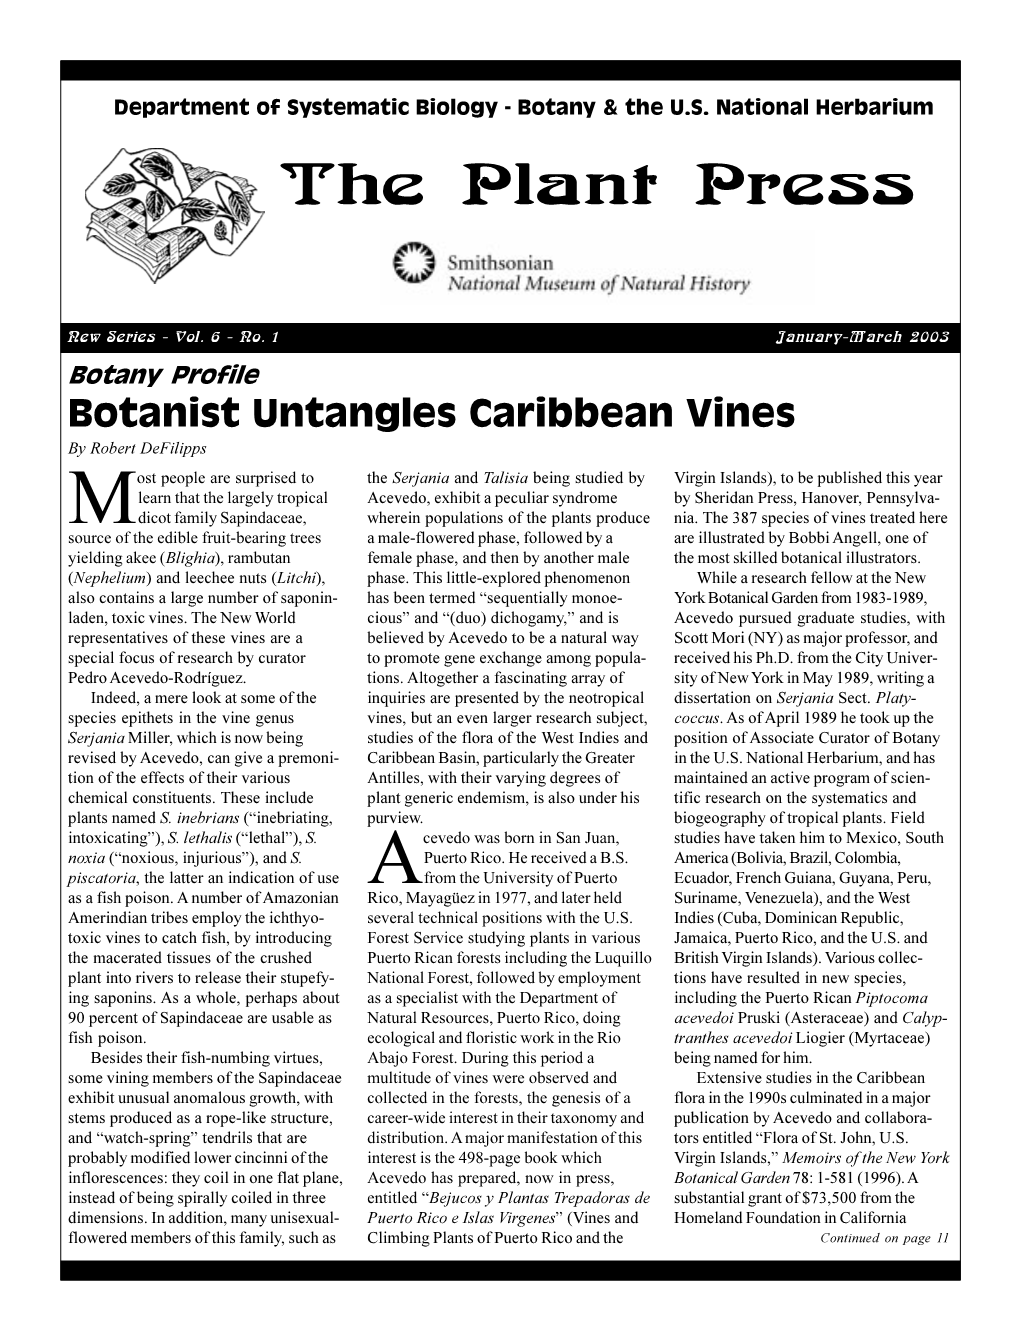 2003 Vol. 6, Issue 1